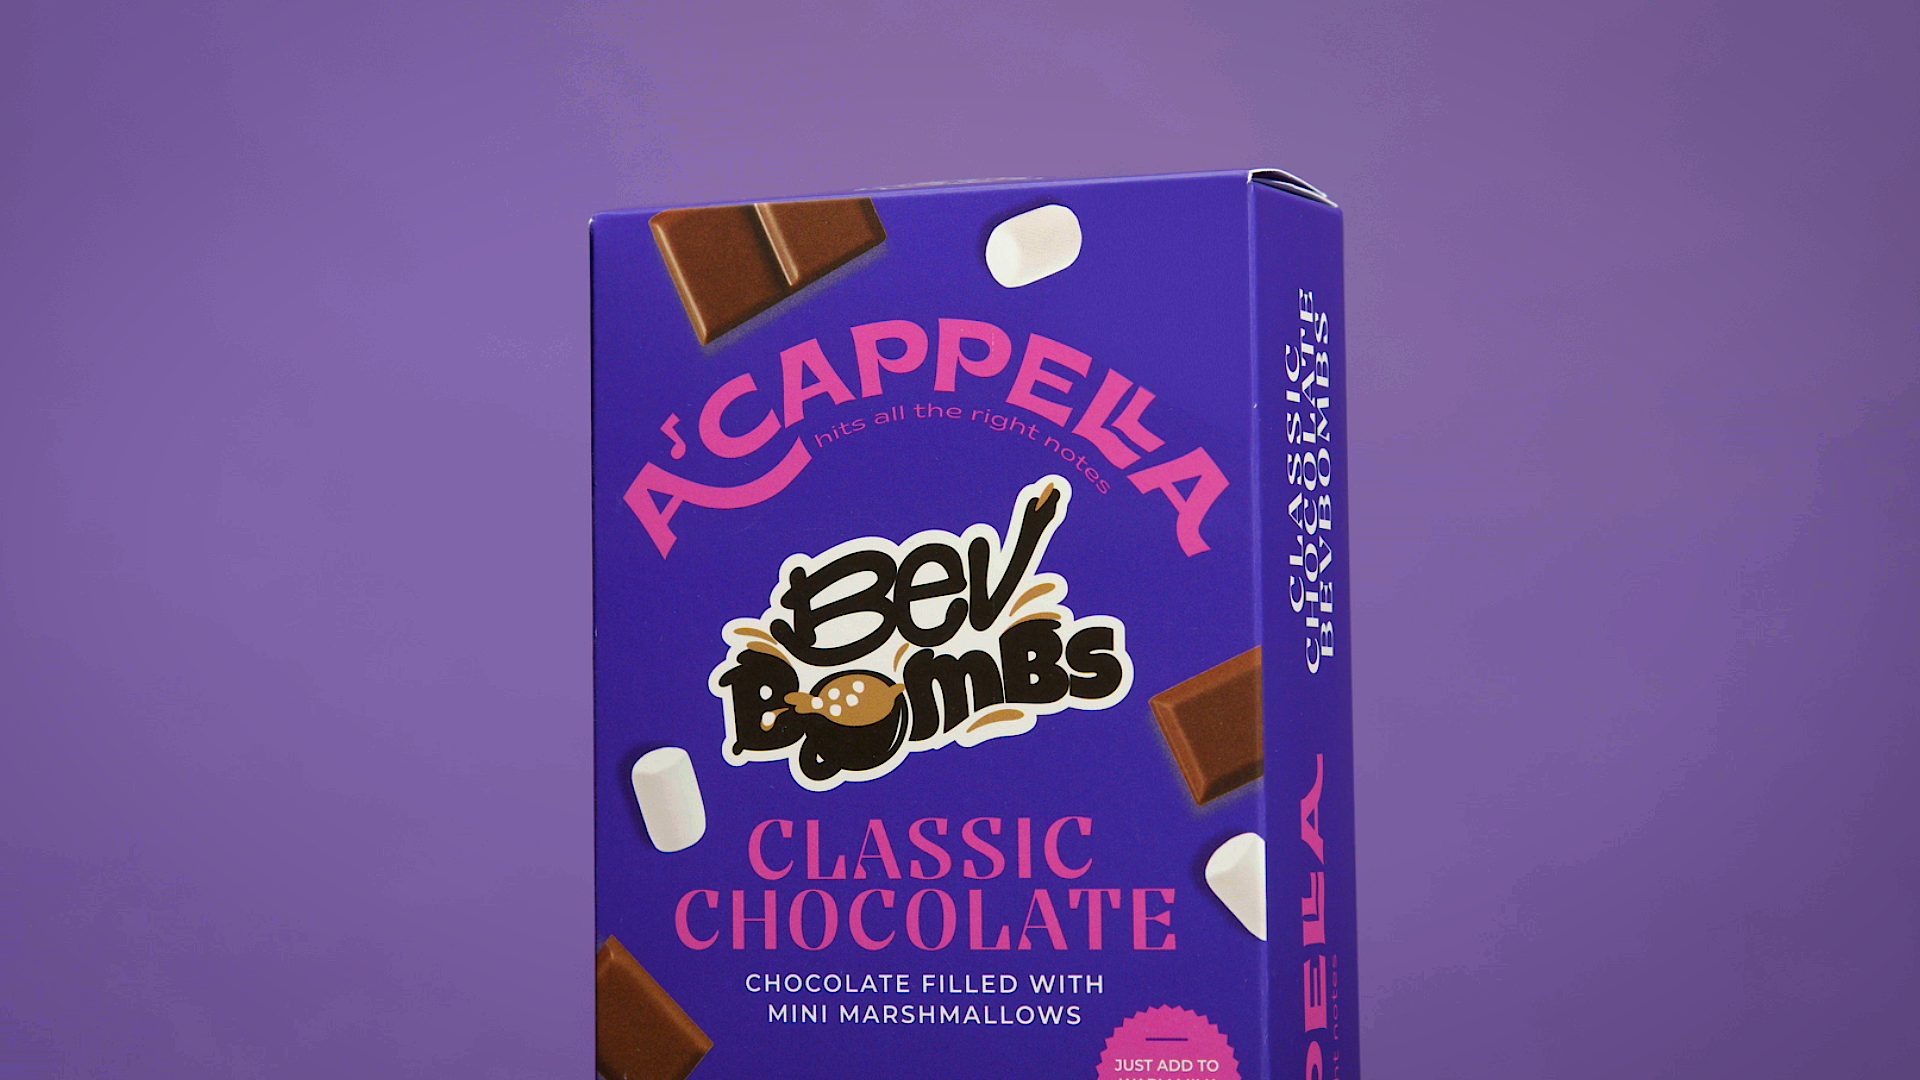 Box of A'cappella Chocolate Classic Chocolate BevBombs on a purple background